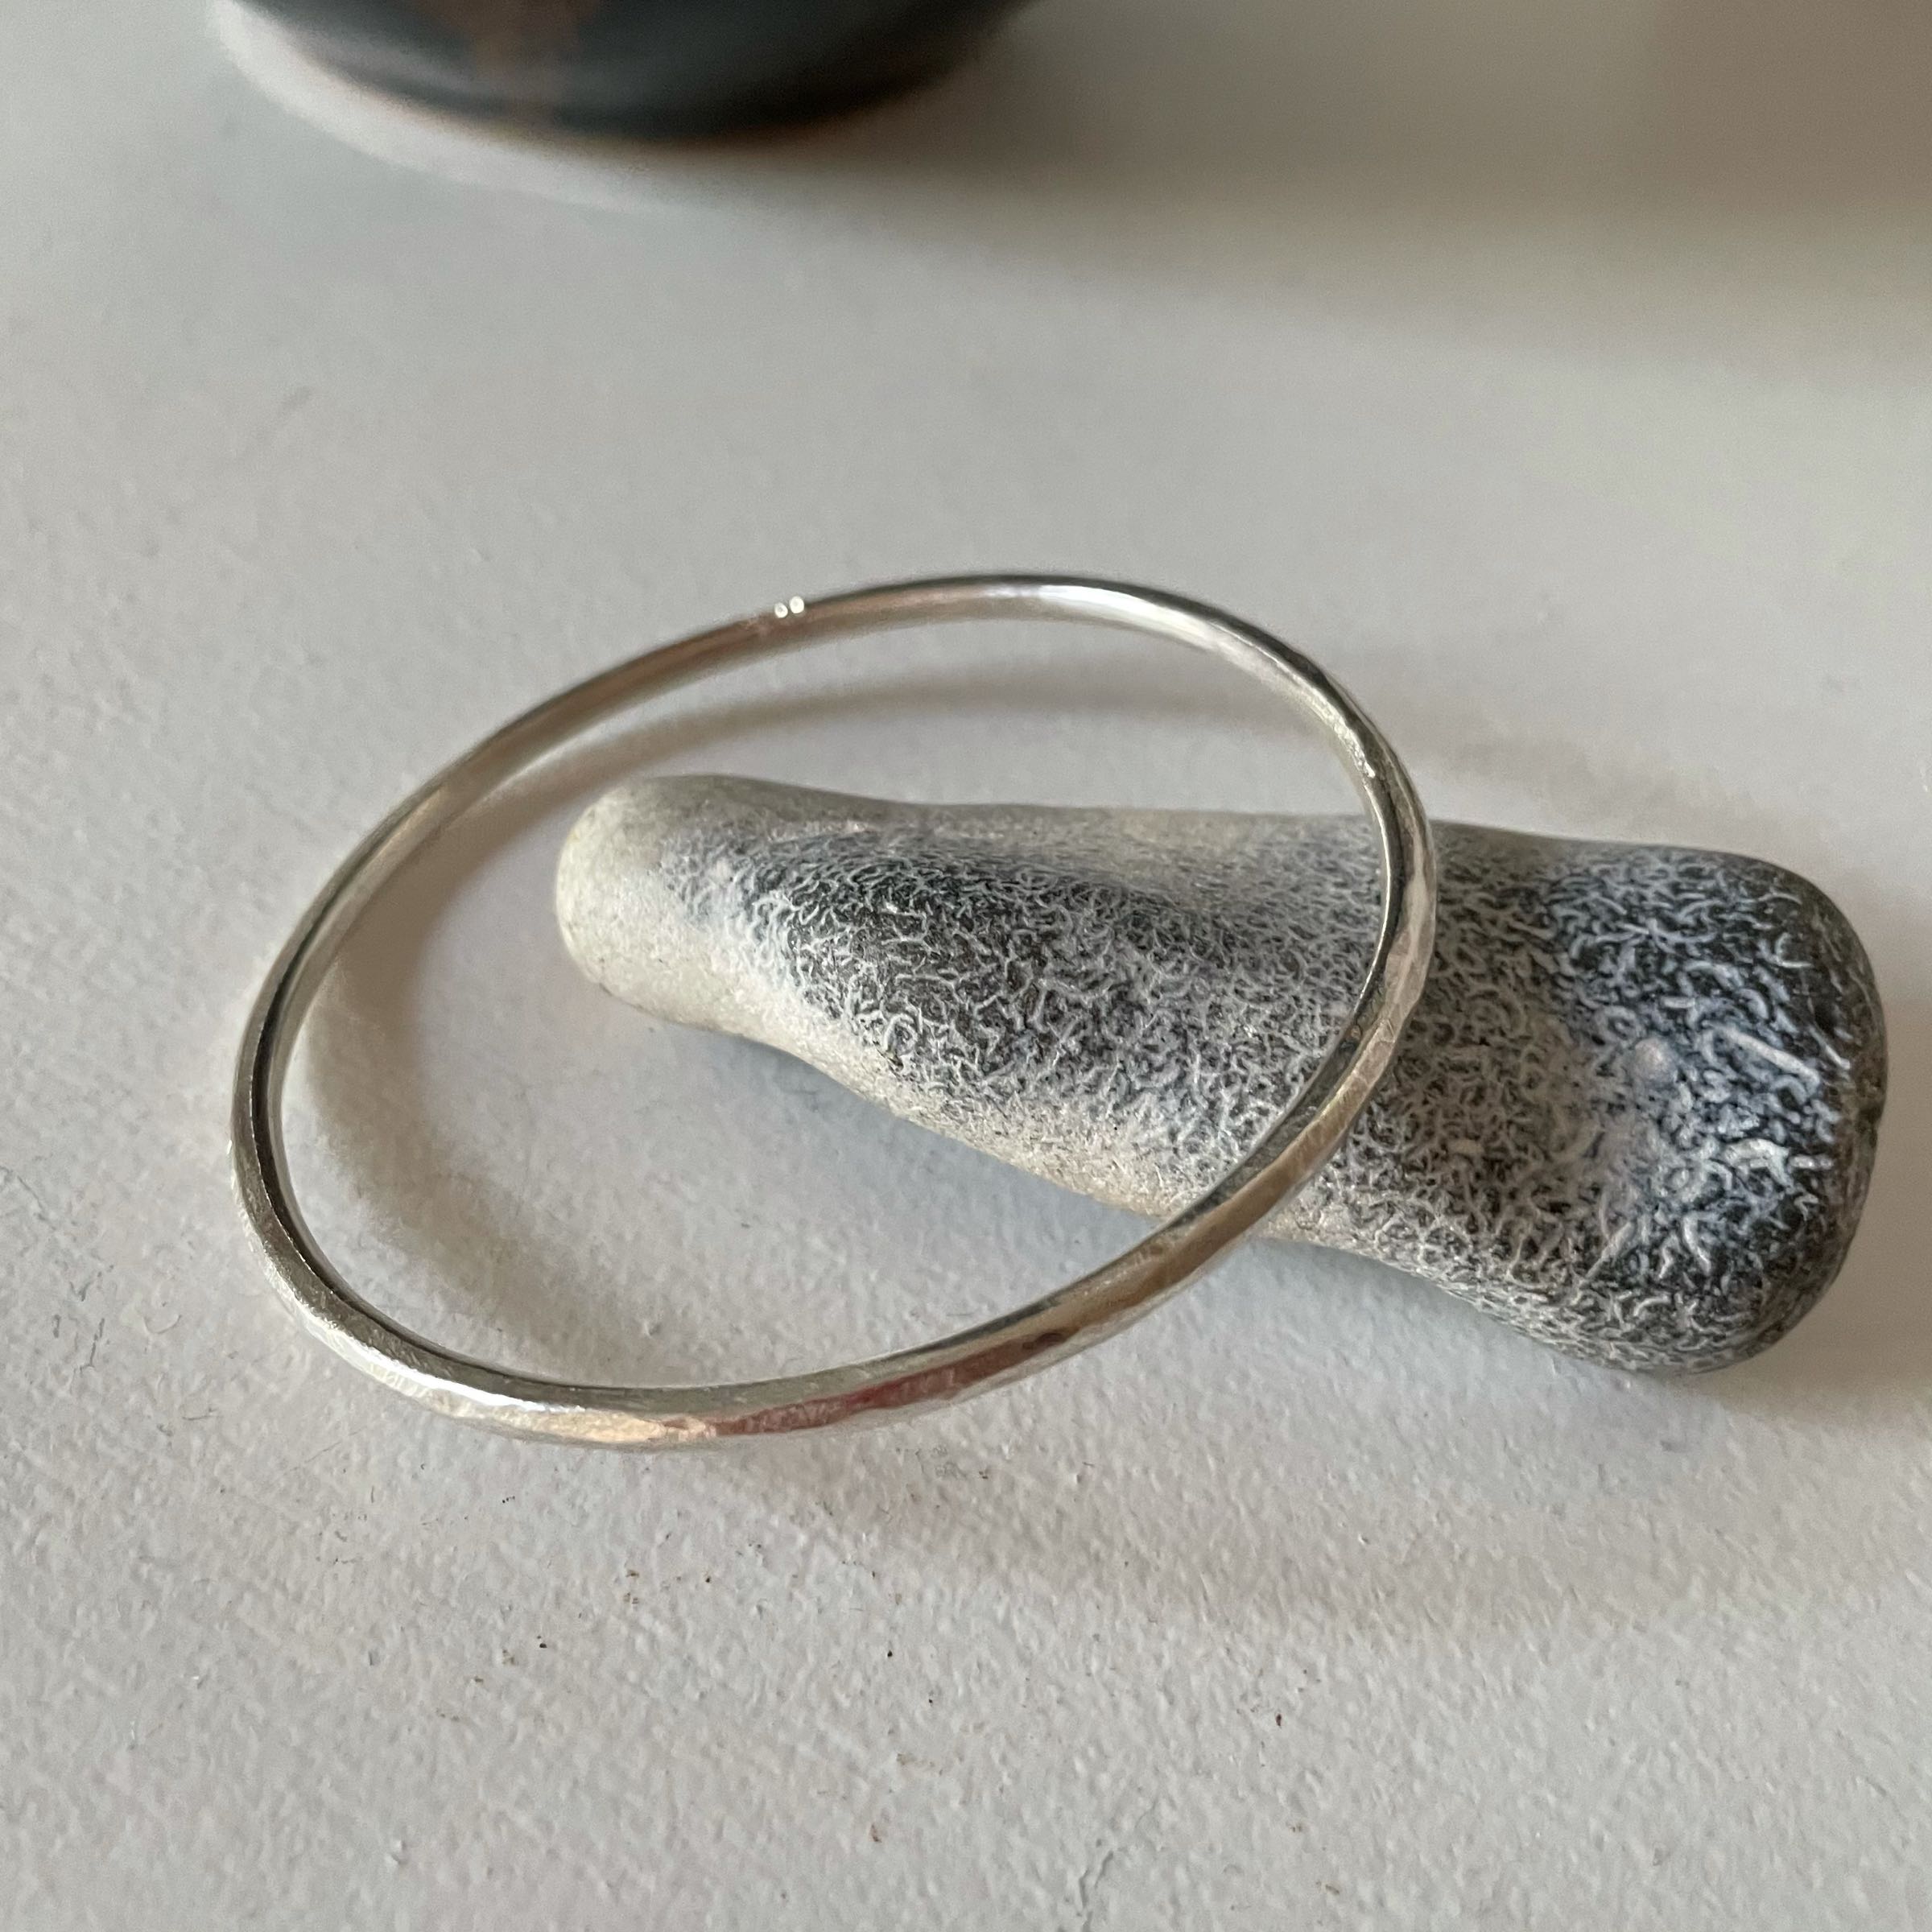 Heavy textured rounded silver bracelet by Lucy Spink